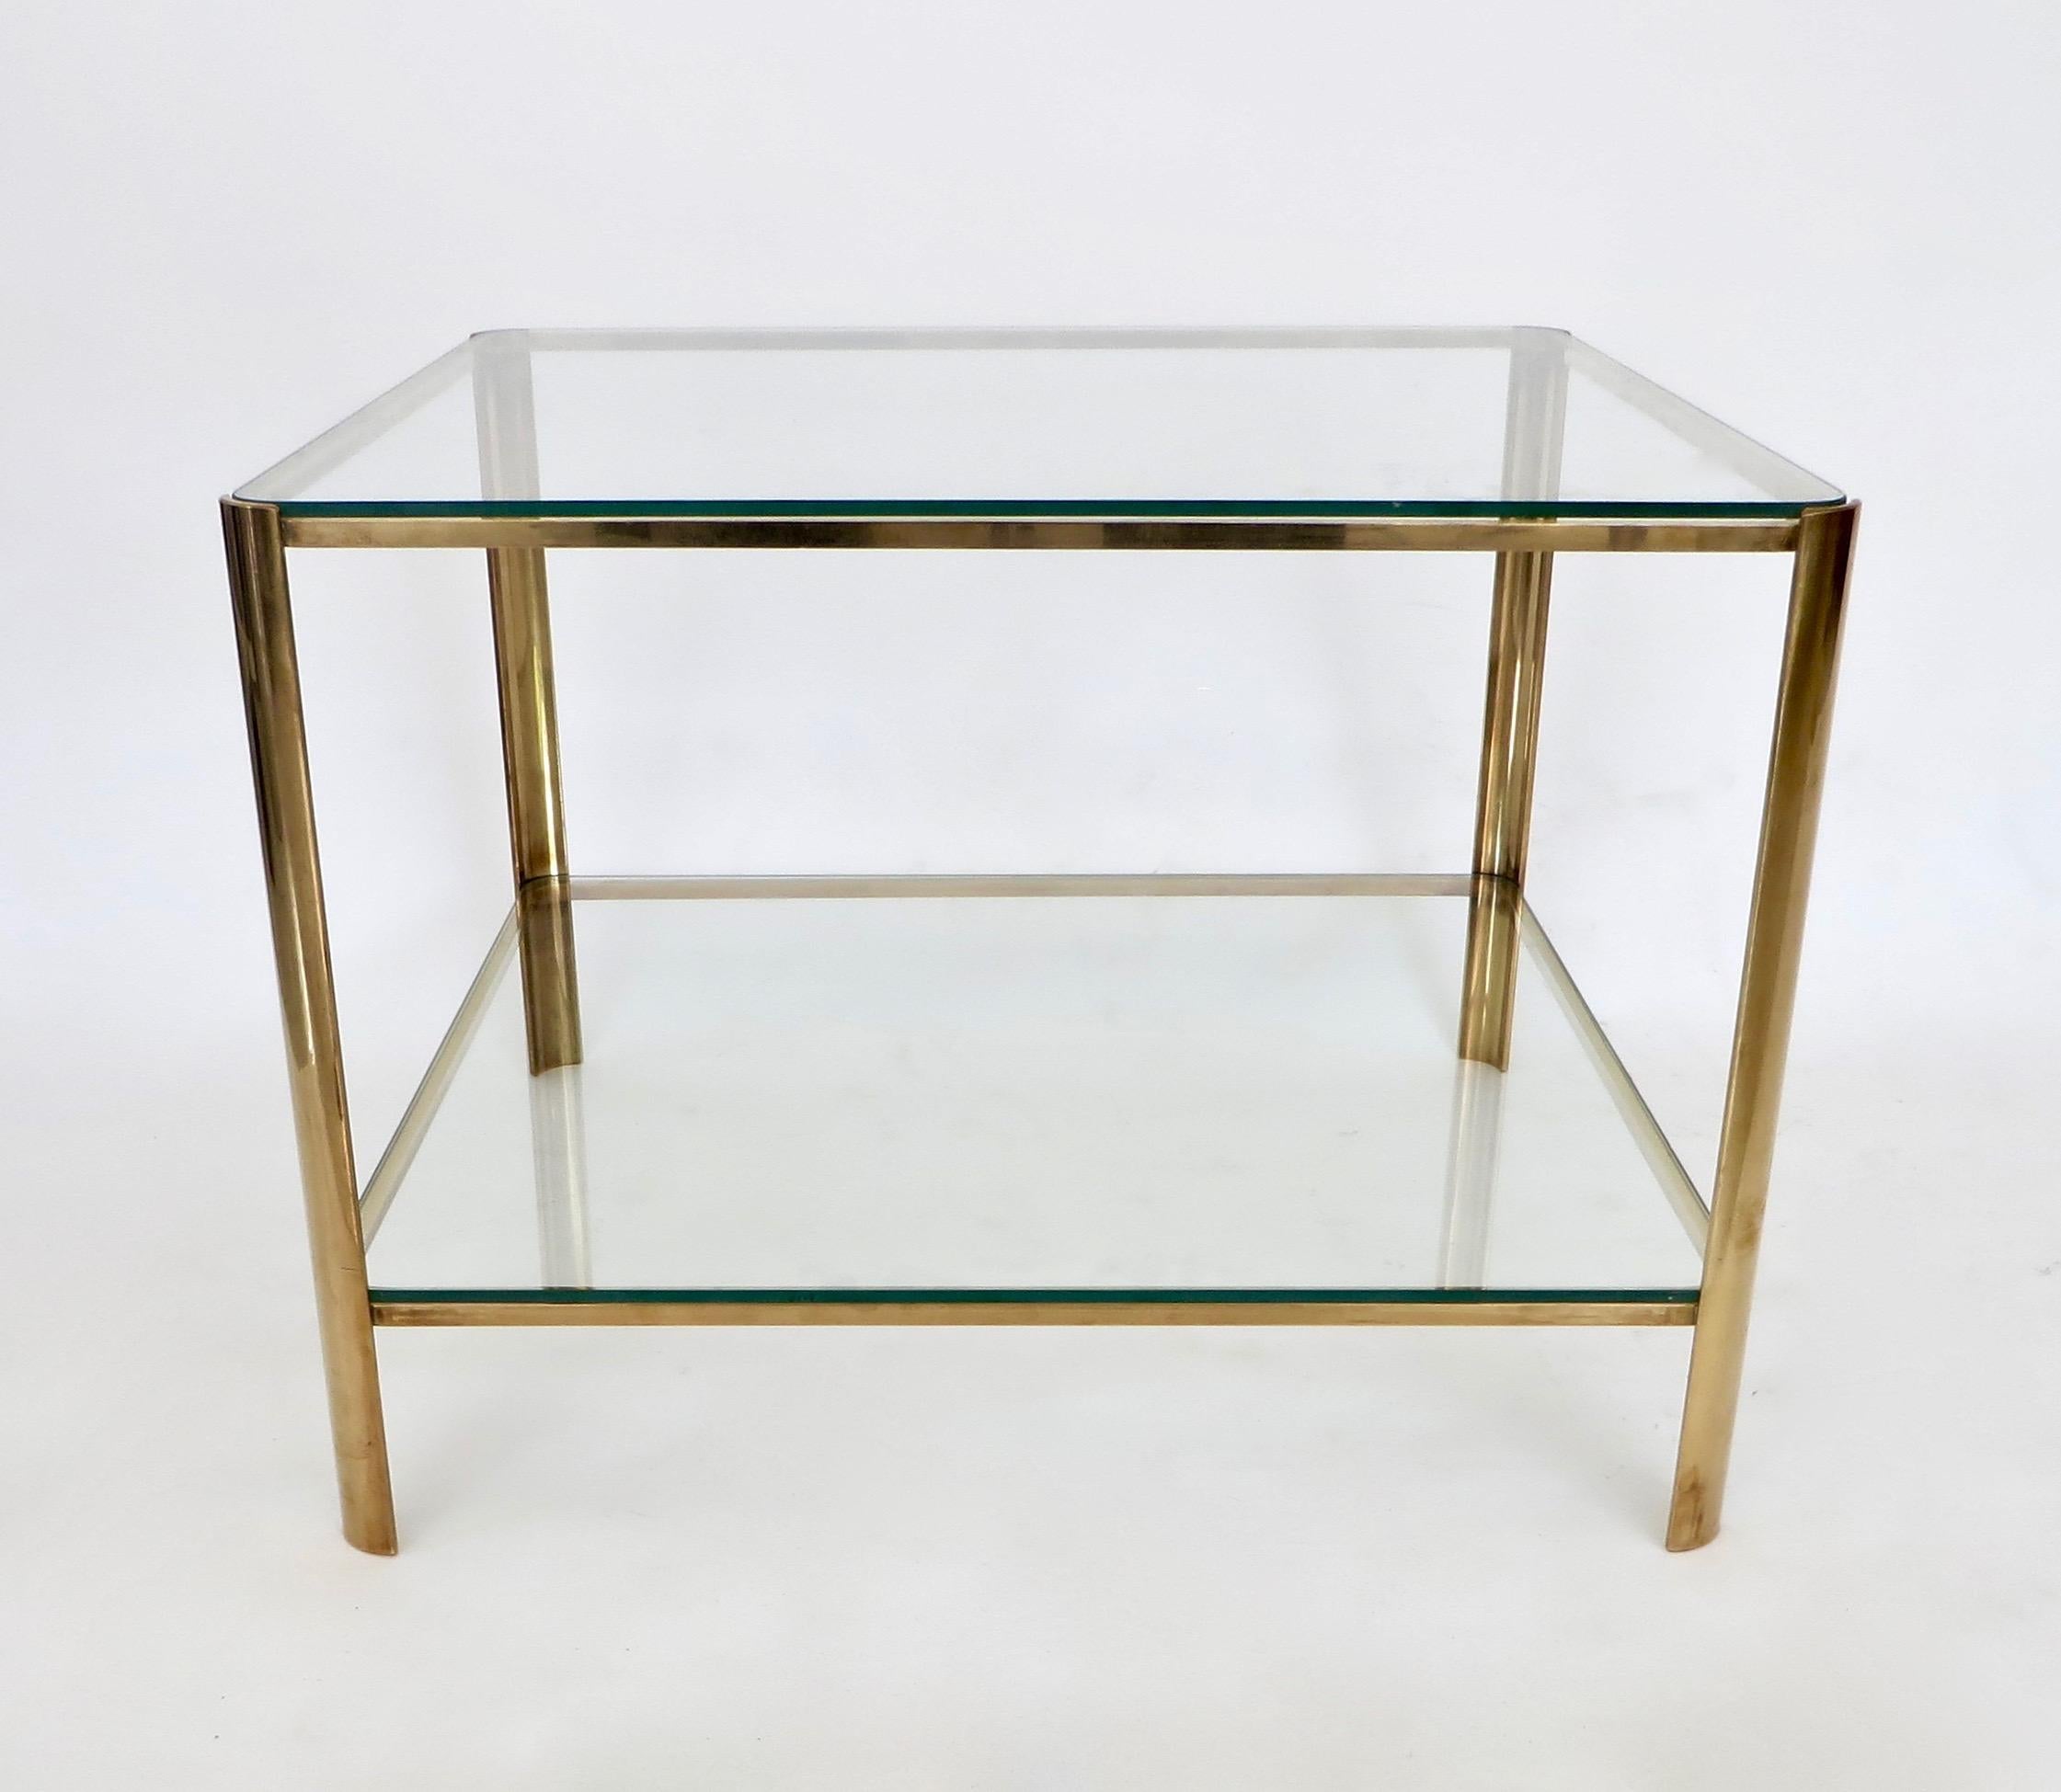 Occasional side or coffee table signed by Jacques Quinet and stamped by Broncz for Maison Malabert. 
It features a strong bronze base and excellent condition original glass with no scratches. Nice patina. 
The glass top and bottom plateau adds